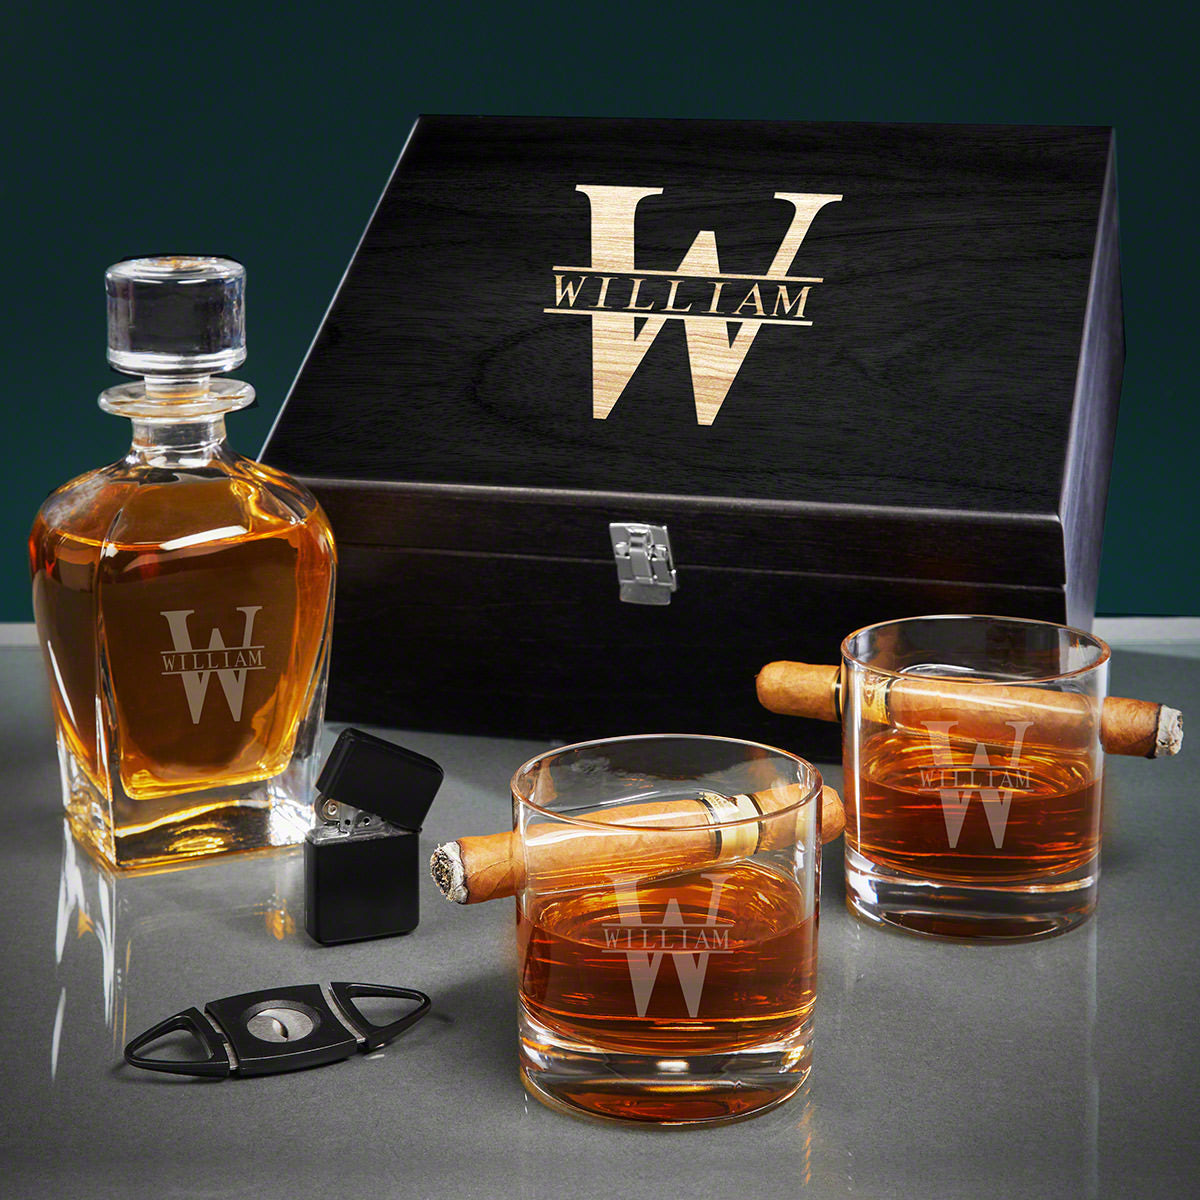 Oxley Custom Cigar Lover Gift Set with Whiskey Decanter and Glasses - 6pc Ebony Black Box